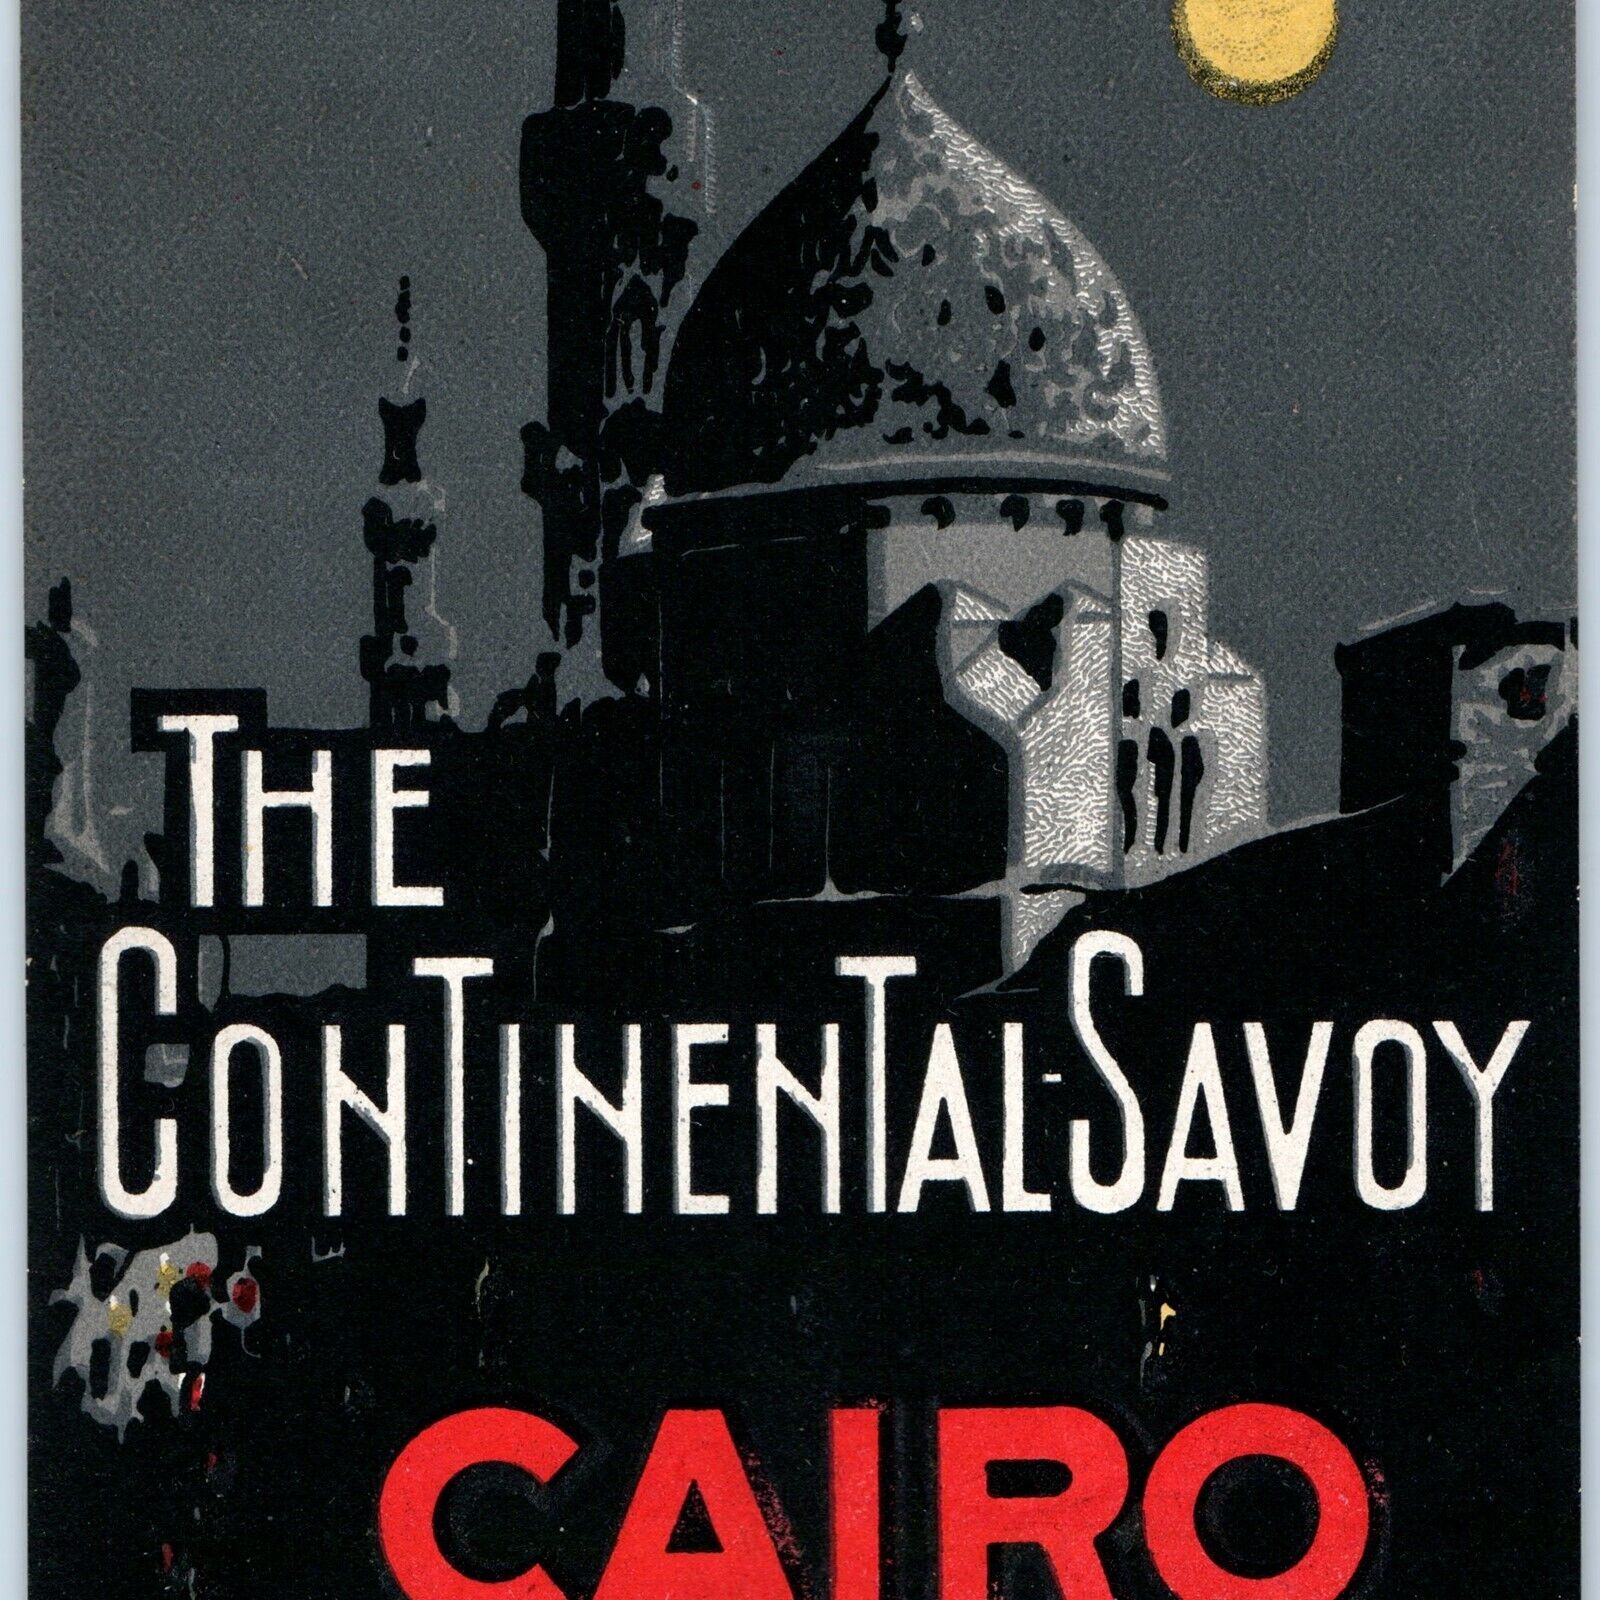 c1930s Cairo, Egypt Luggage Label The Continental Savoy Hotel Decal 2C